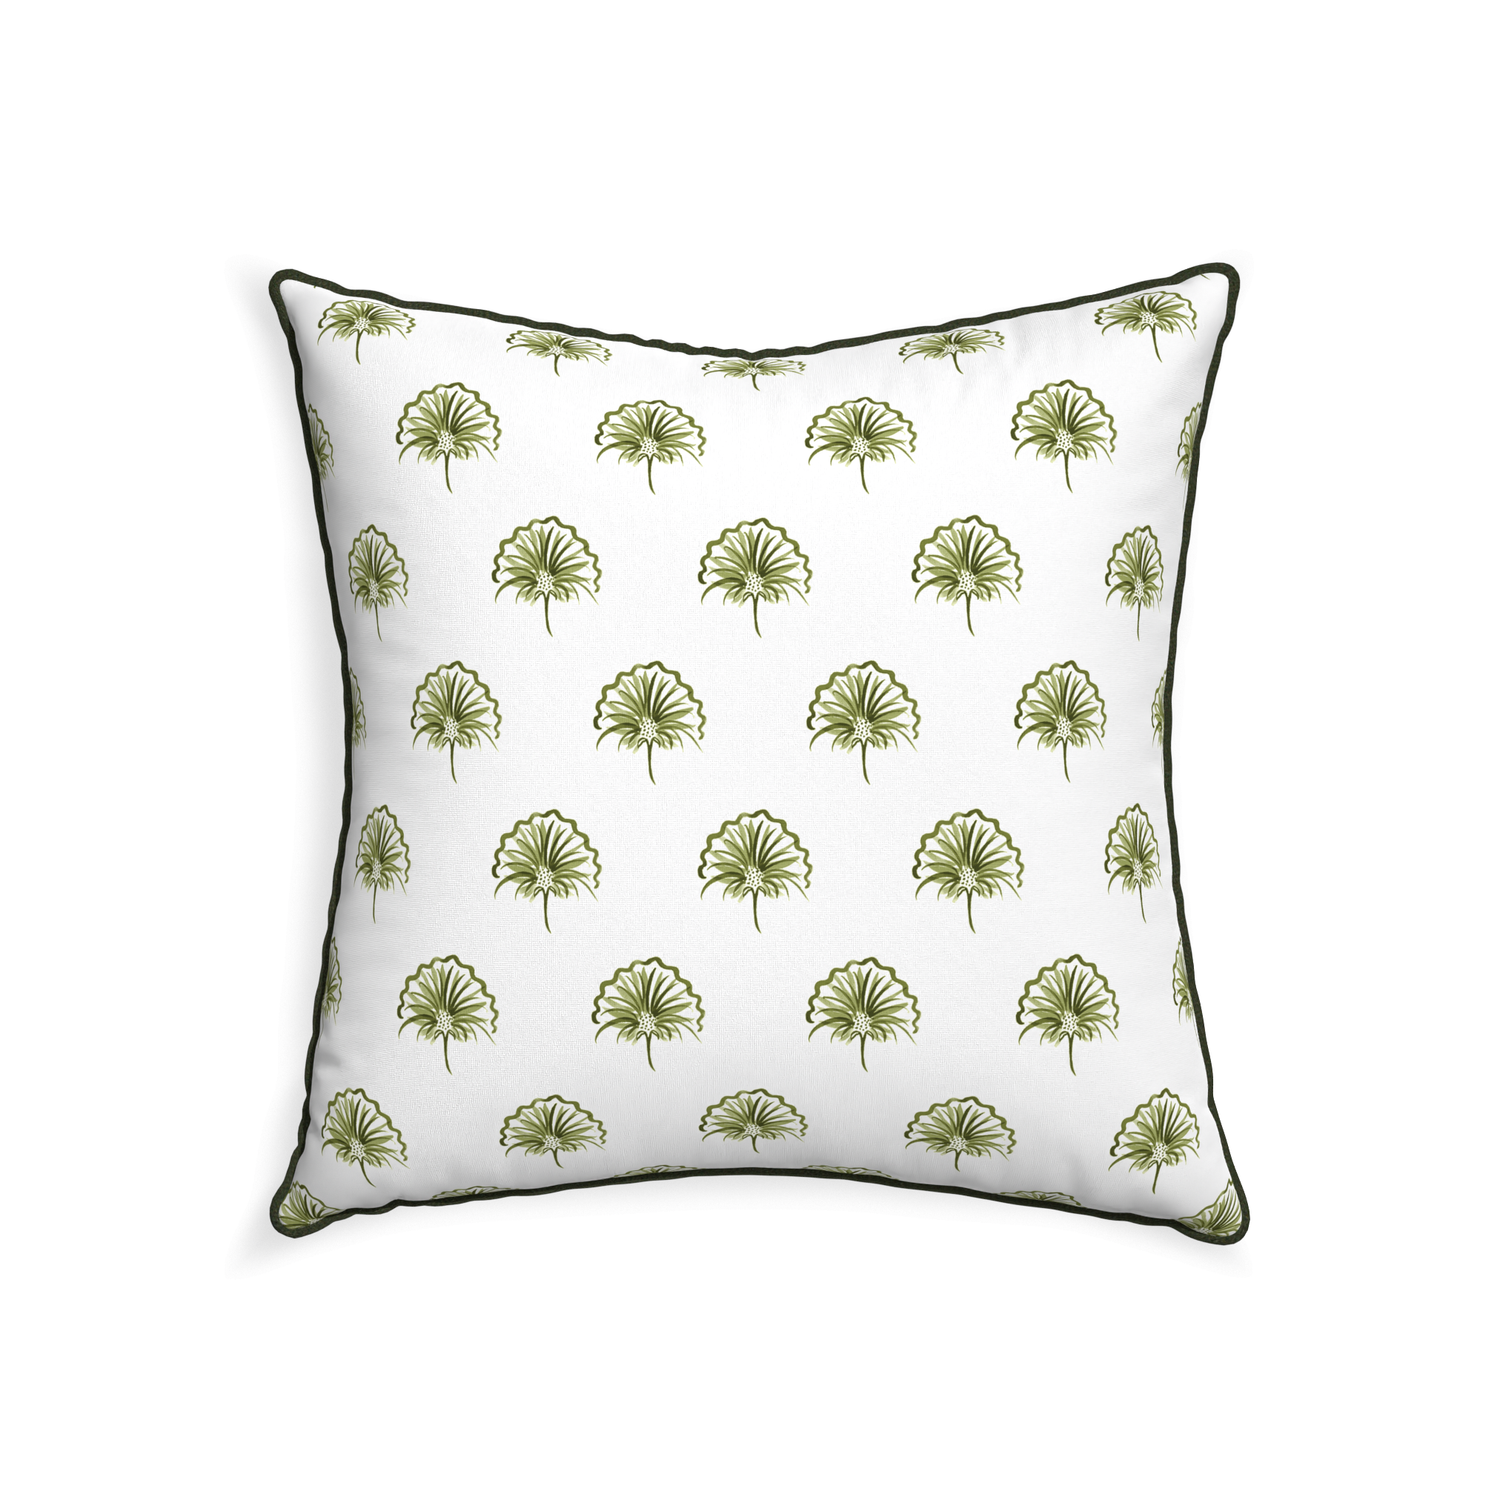 22-square penelope moss custom green floralpillow with f piping on white background